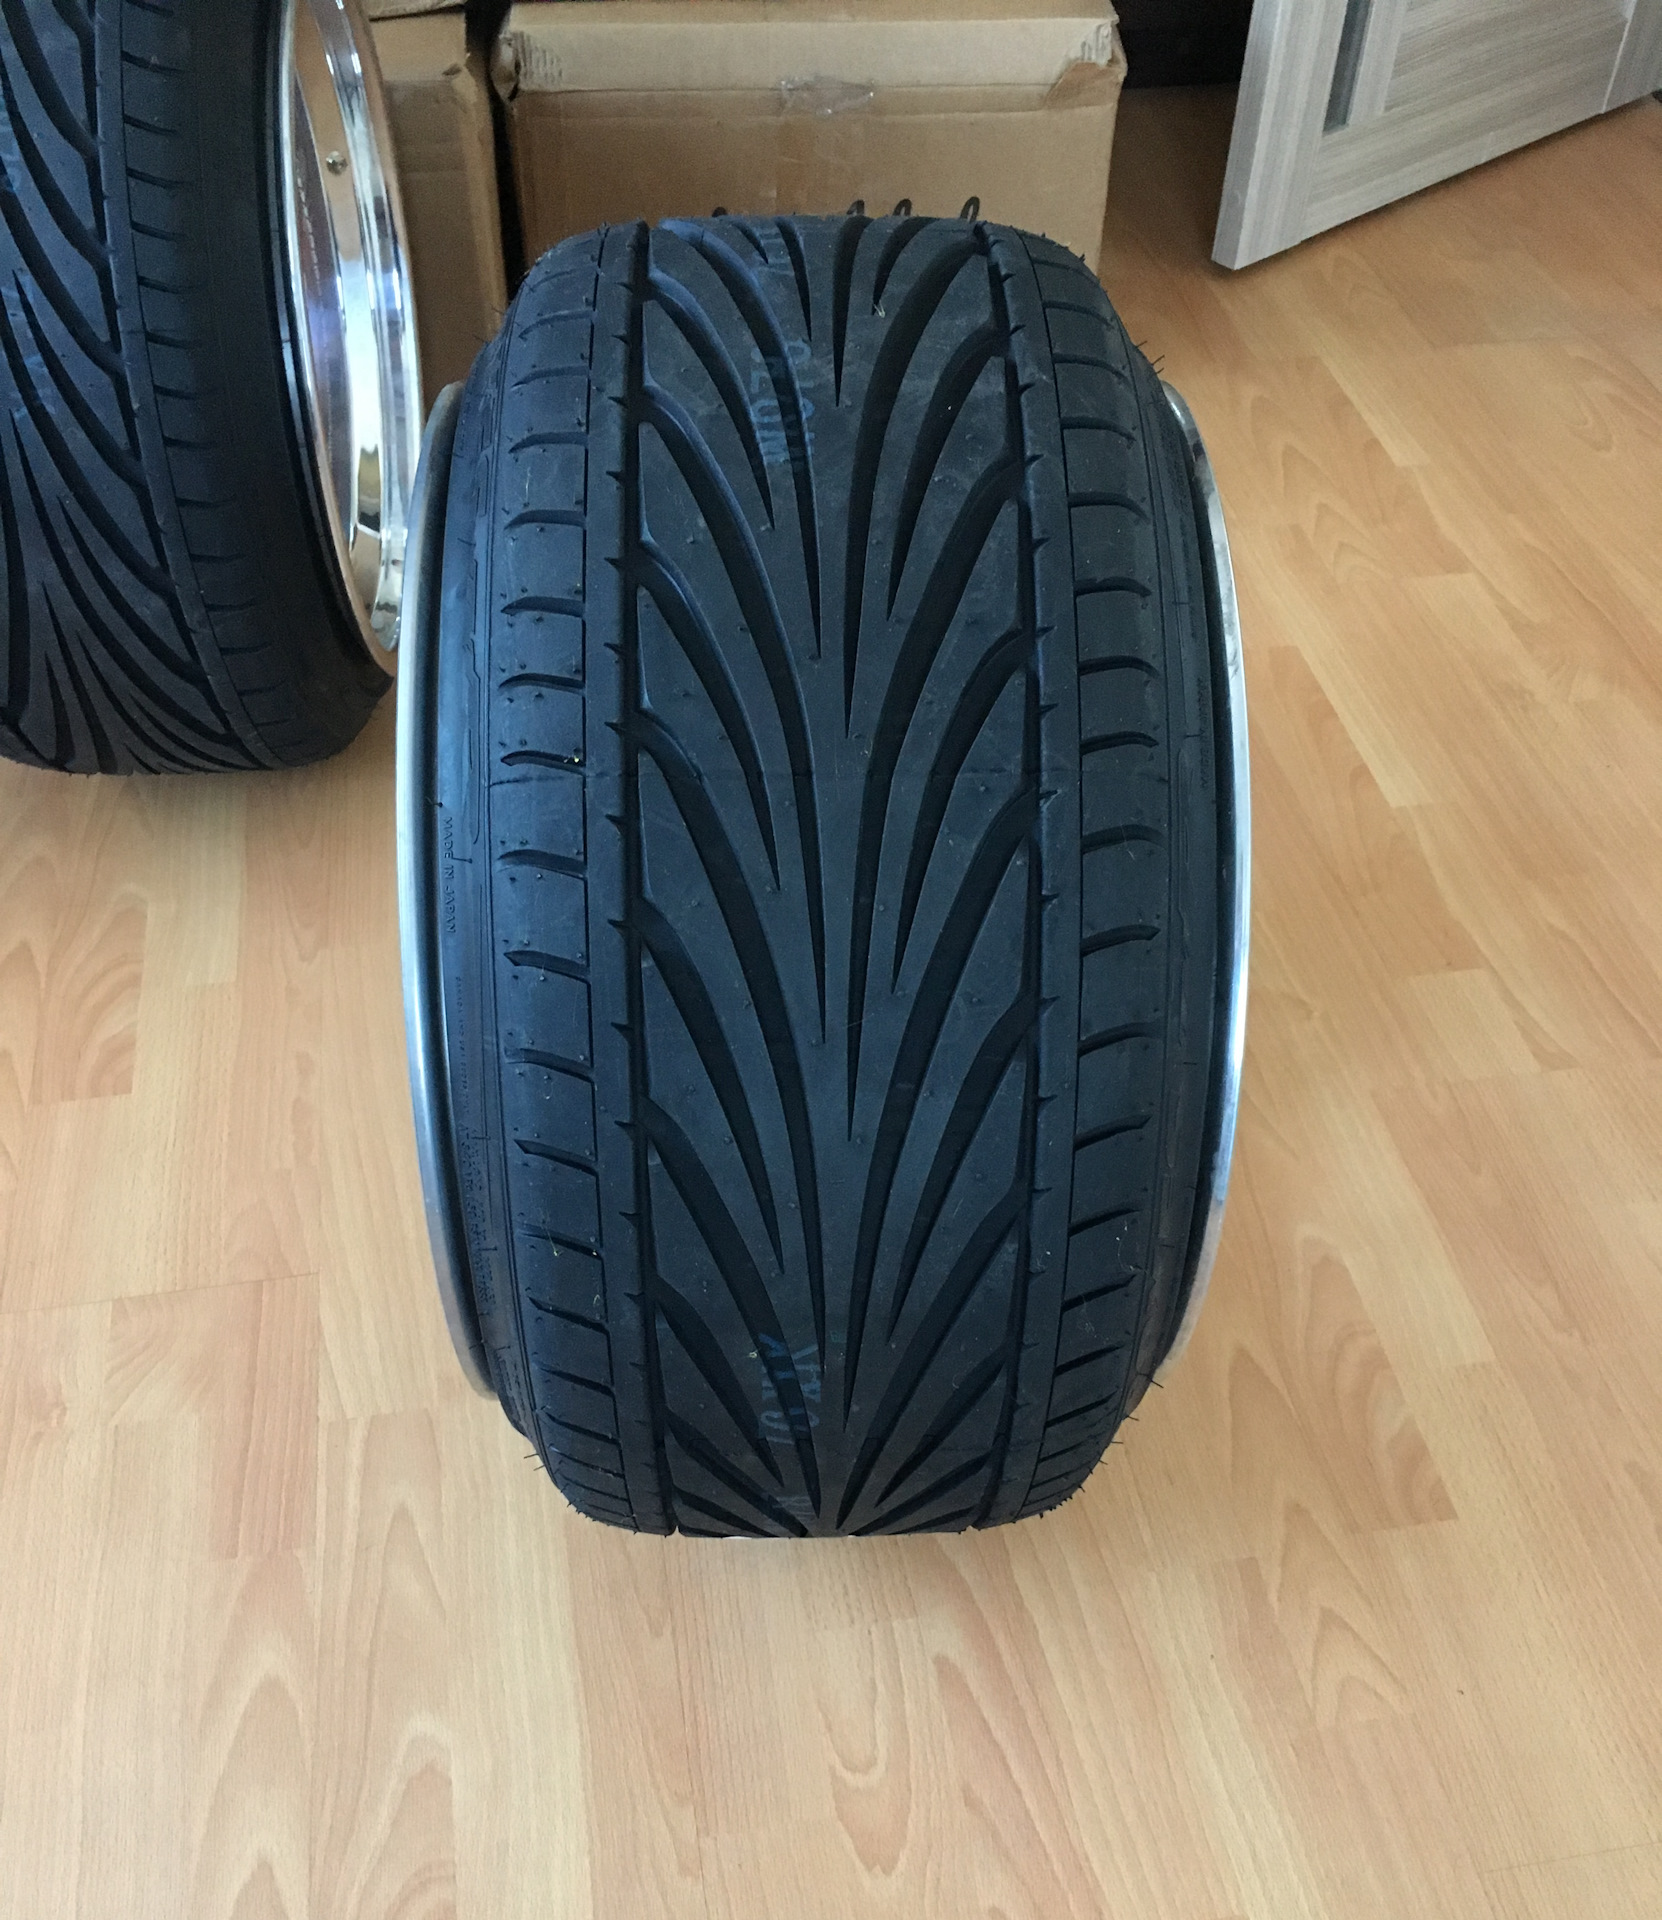 Шины proxes sport. Toyo PROXES t1r. Тойо 888 255 35 18. Toyo t1r Sport. Toyo PROXES t1r Sport.